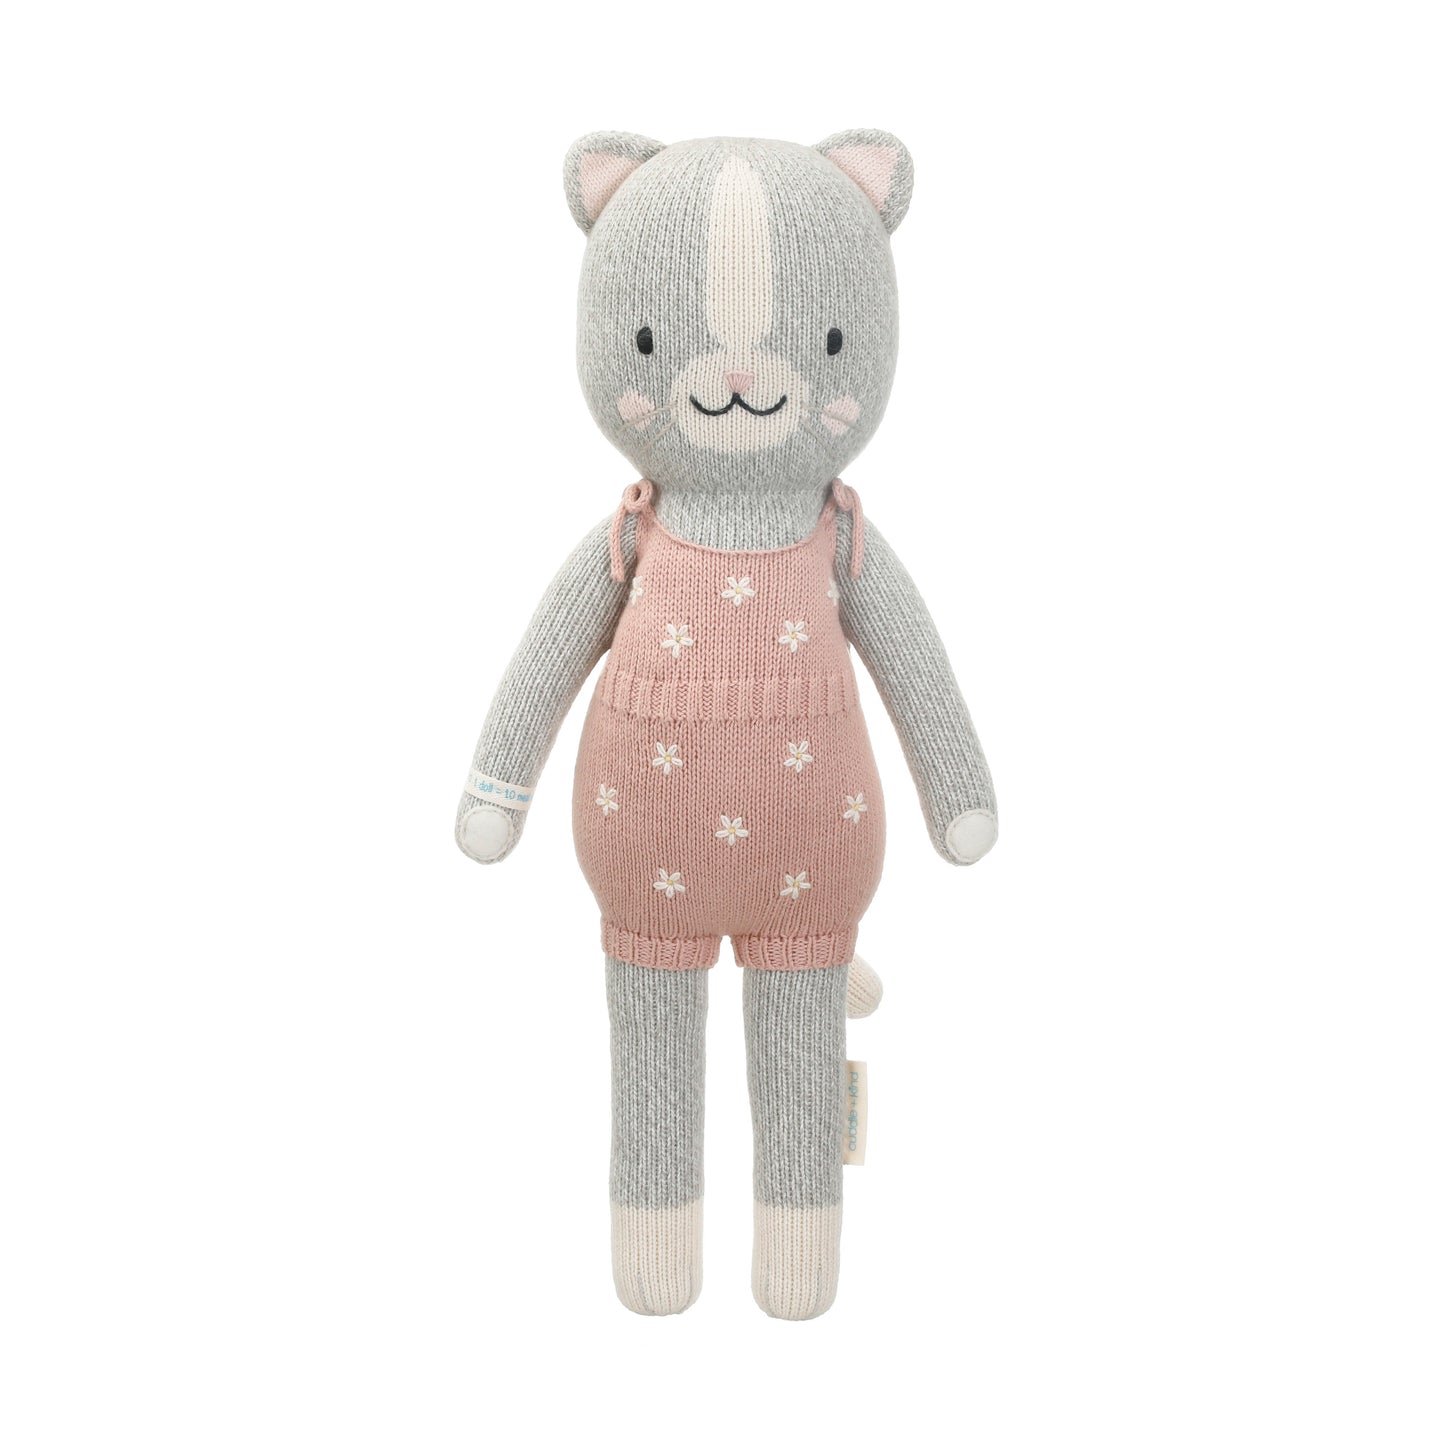 Daisy the kitten shown from 360°. Daisy is wearing a pink romper with daisies embroidered onto it and bows on the shoulders.